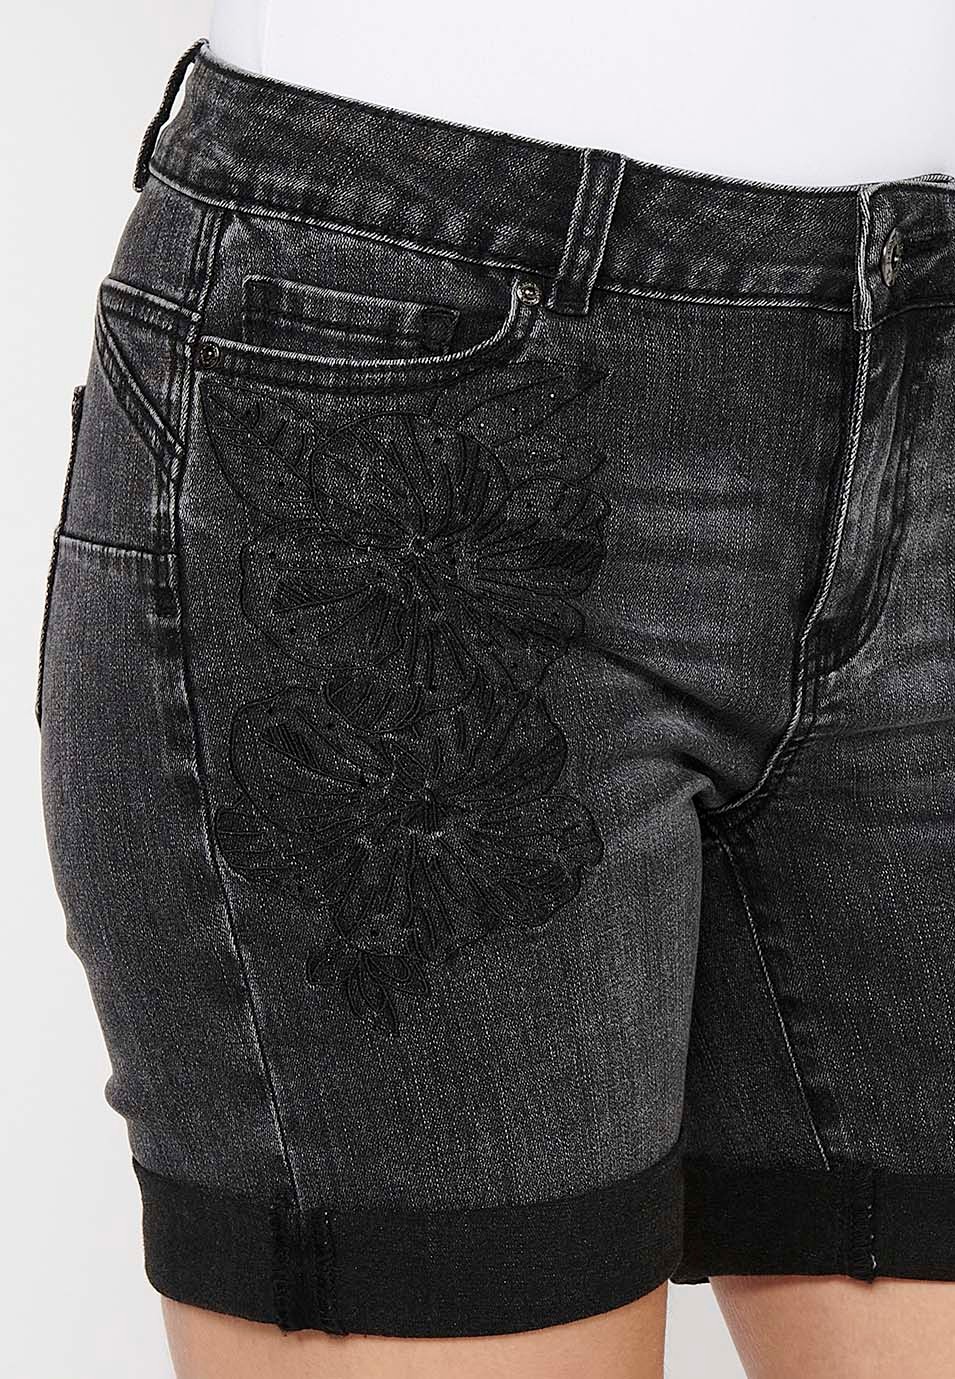 Shorts with a turn-up finish with front closure with zipper and button and floral embroidery in Black for Women 2